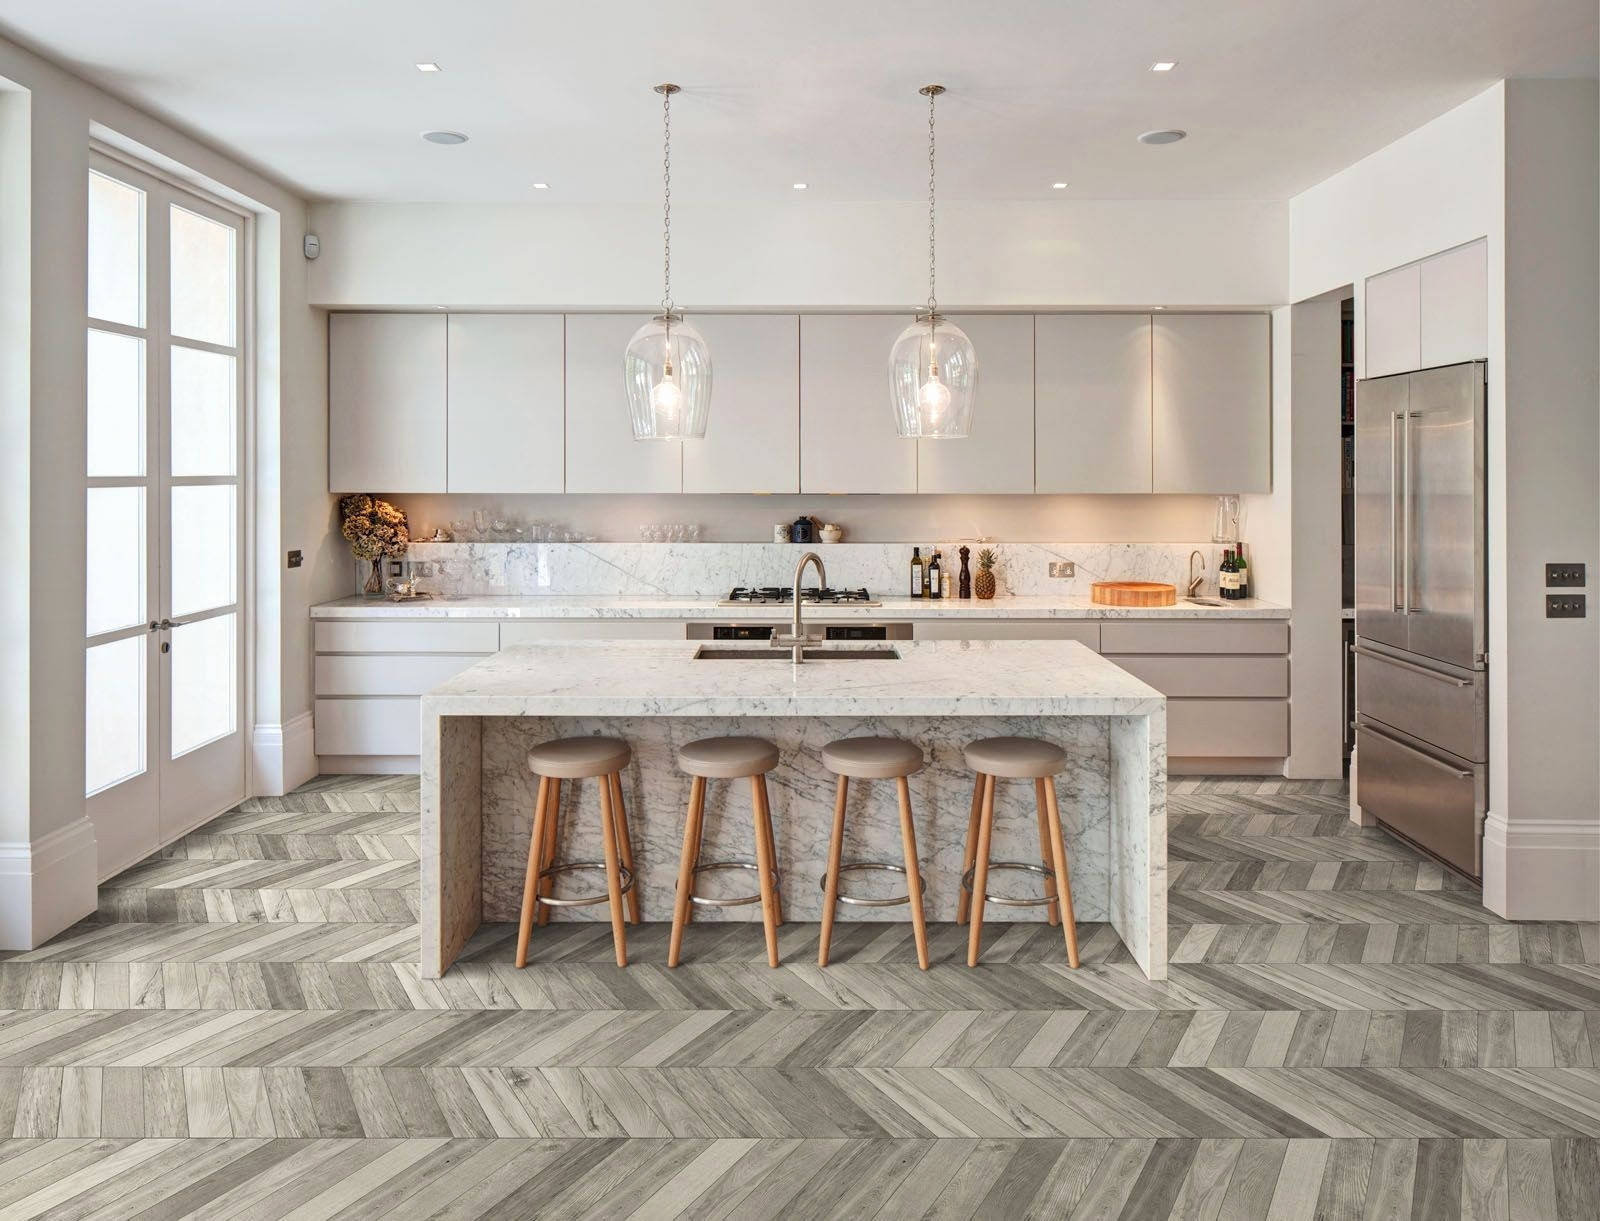 29 Awesome Ss Hardwood Floors 2024 free download ss hardwood floors of kitchen hardwood floors vs tile best of d21c9c917d f06d592a0f 300 throughout kitchen hardwood floors vs tile luxury 11 awesome wood floors in kitchen vs tile